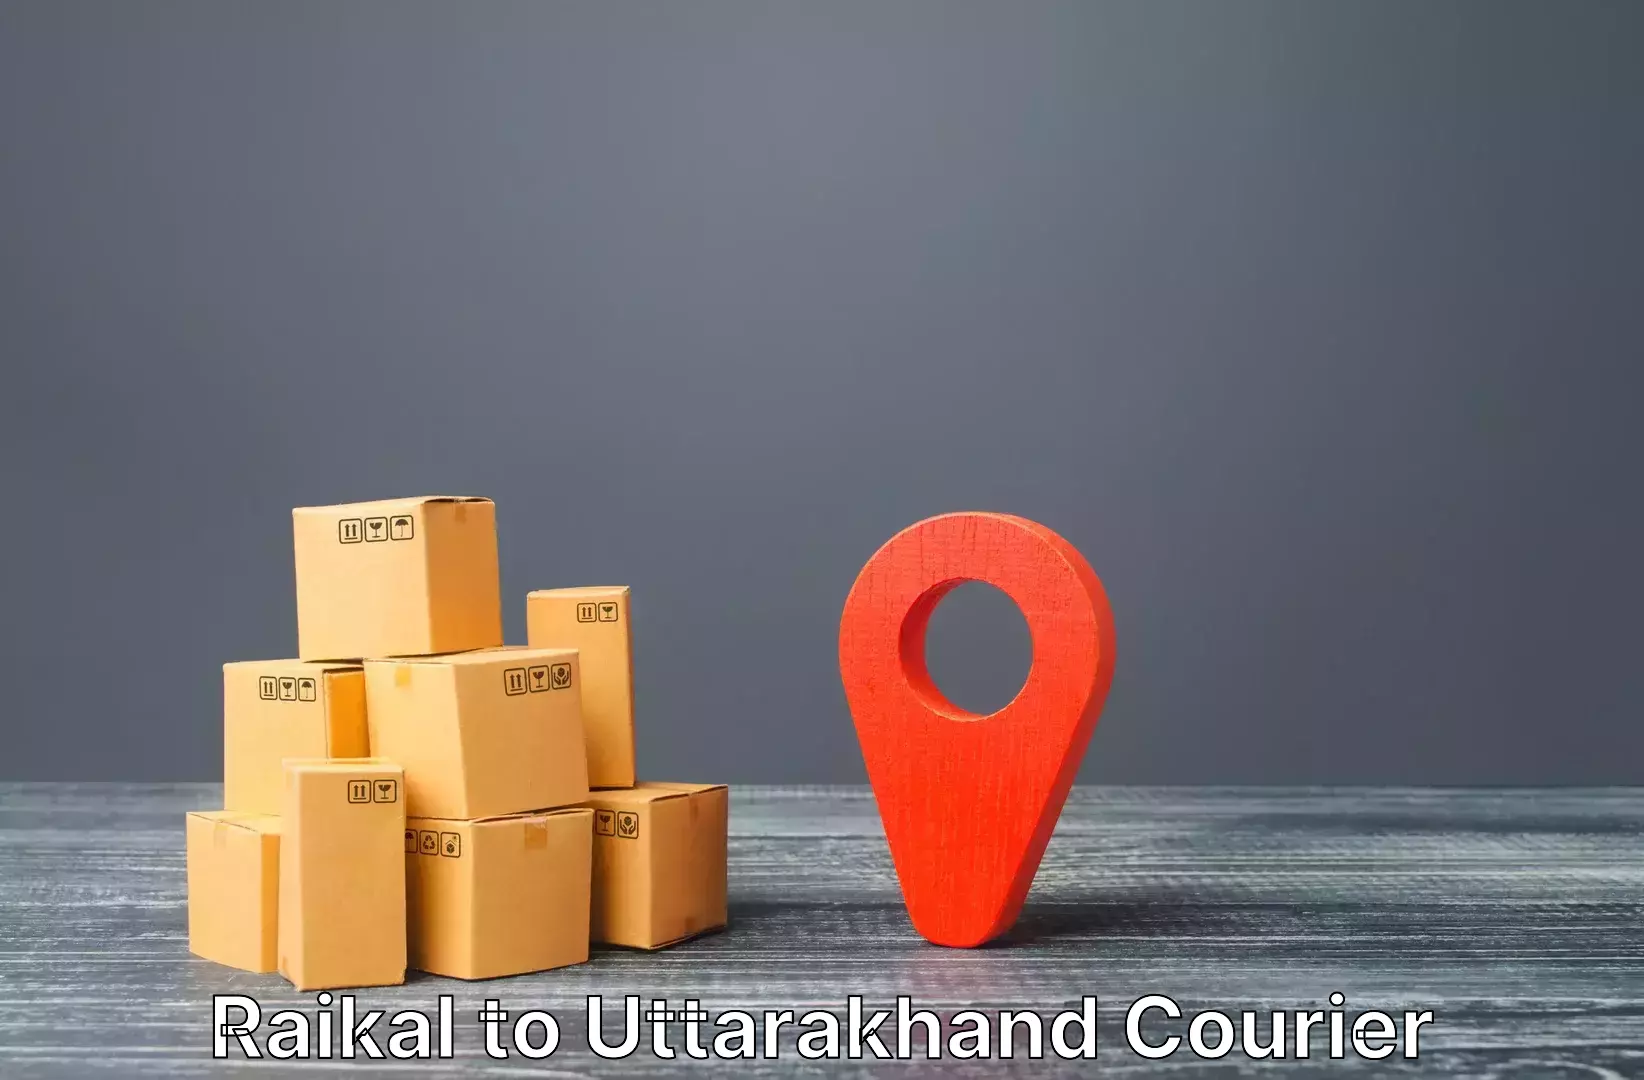 Premium luggage delivery in Raikal to Rishikesh